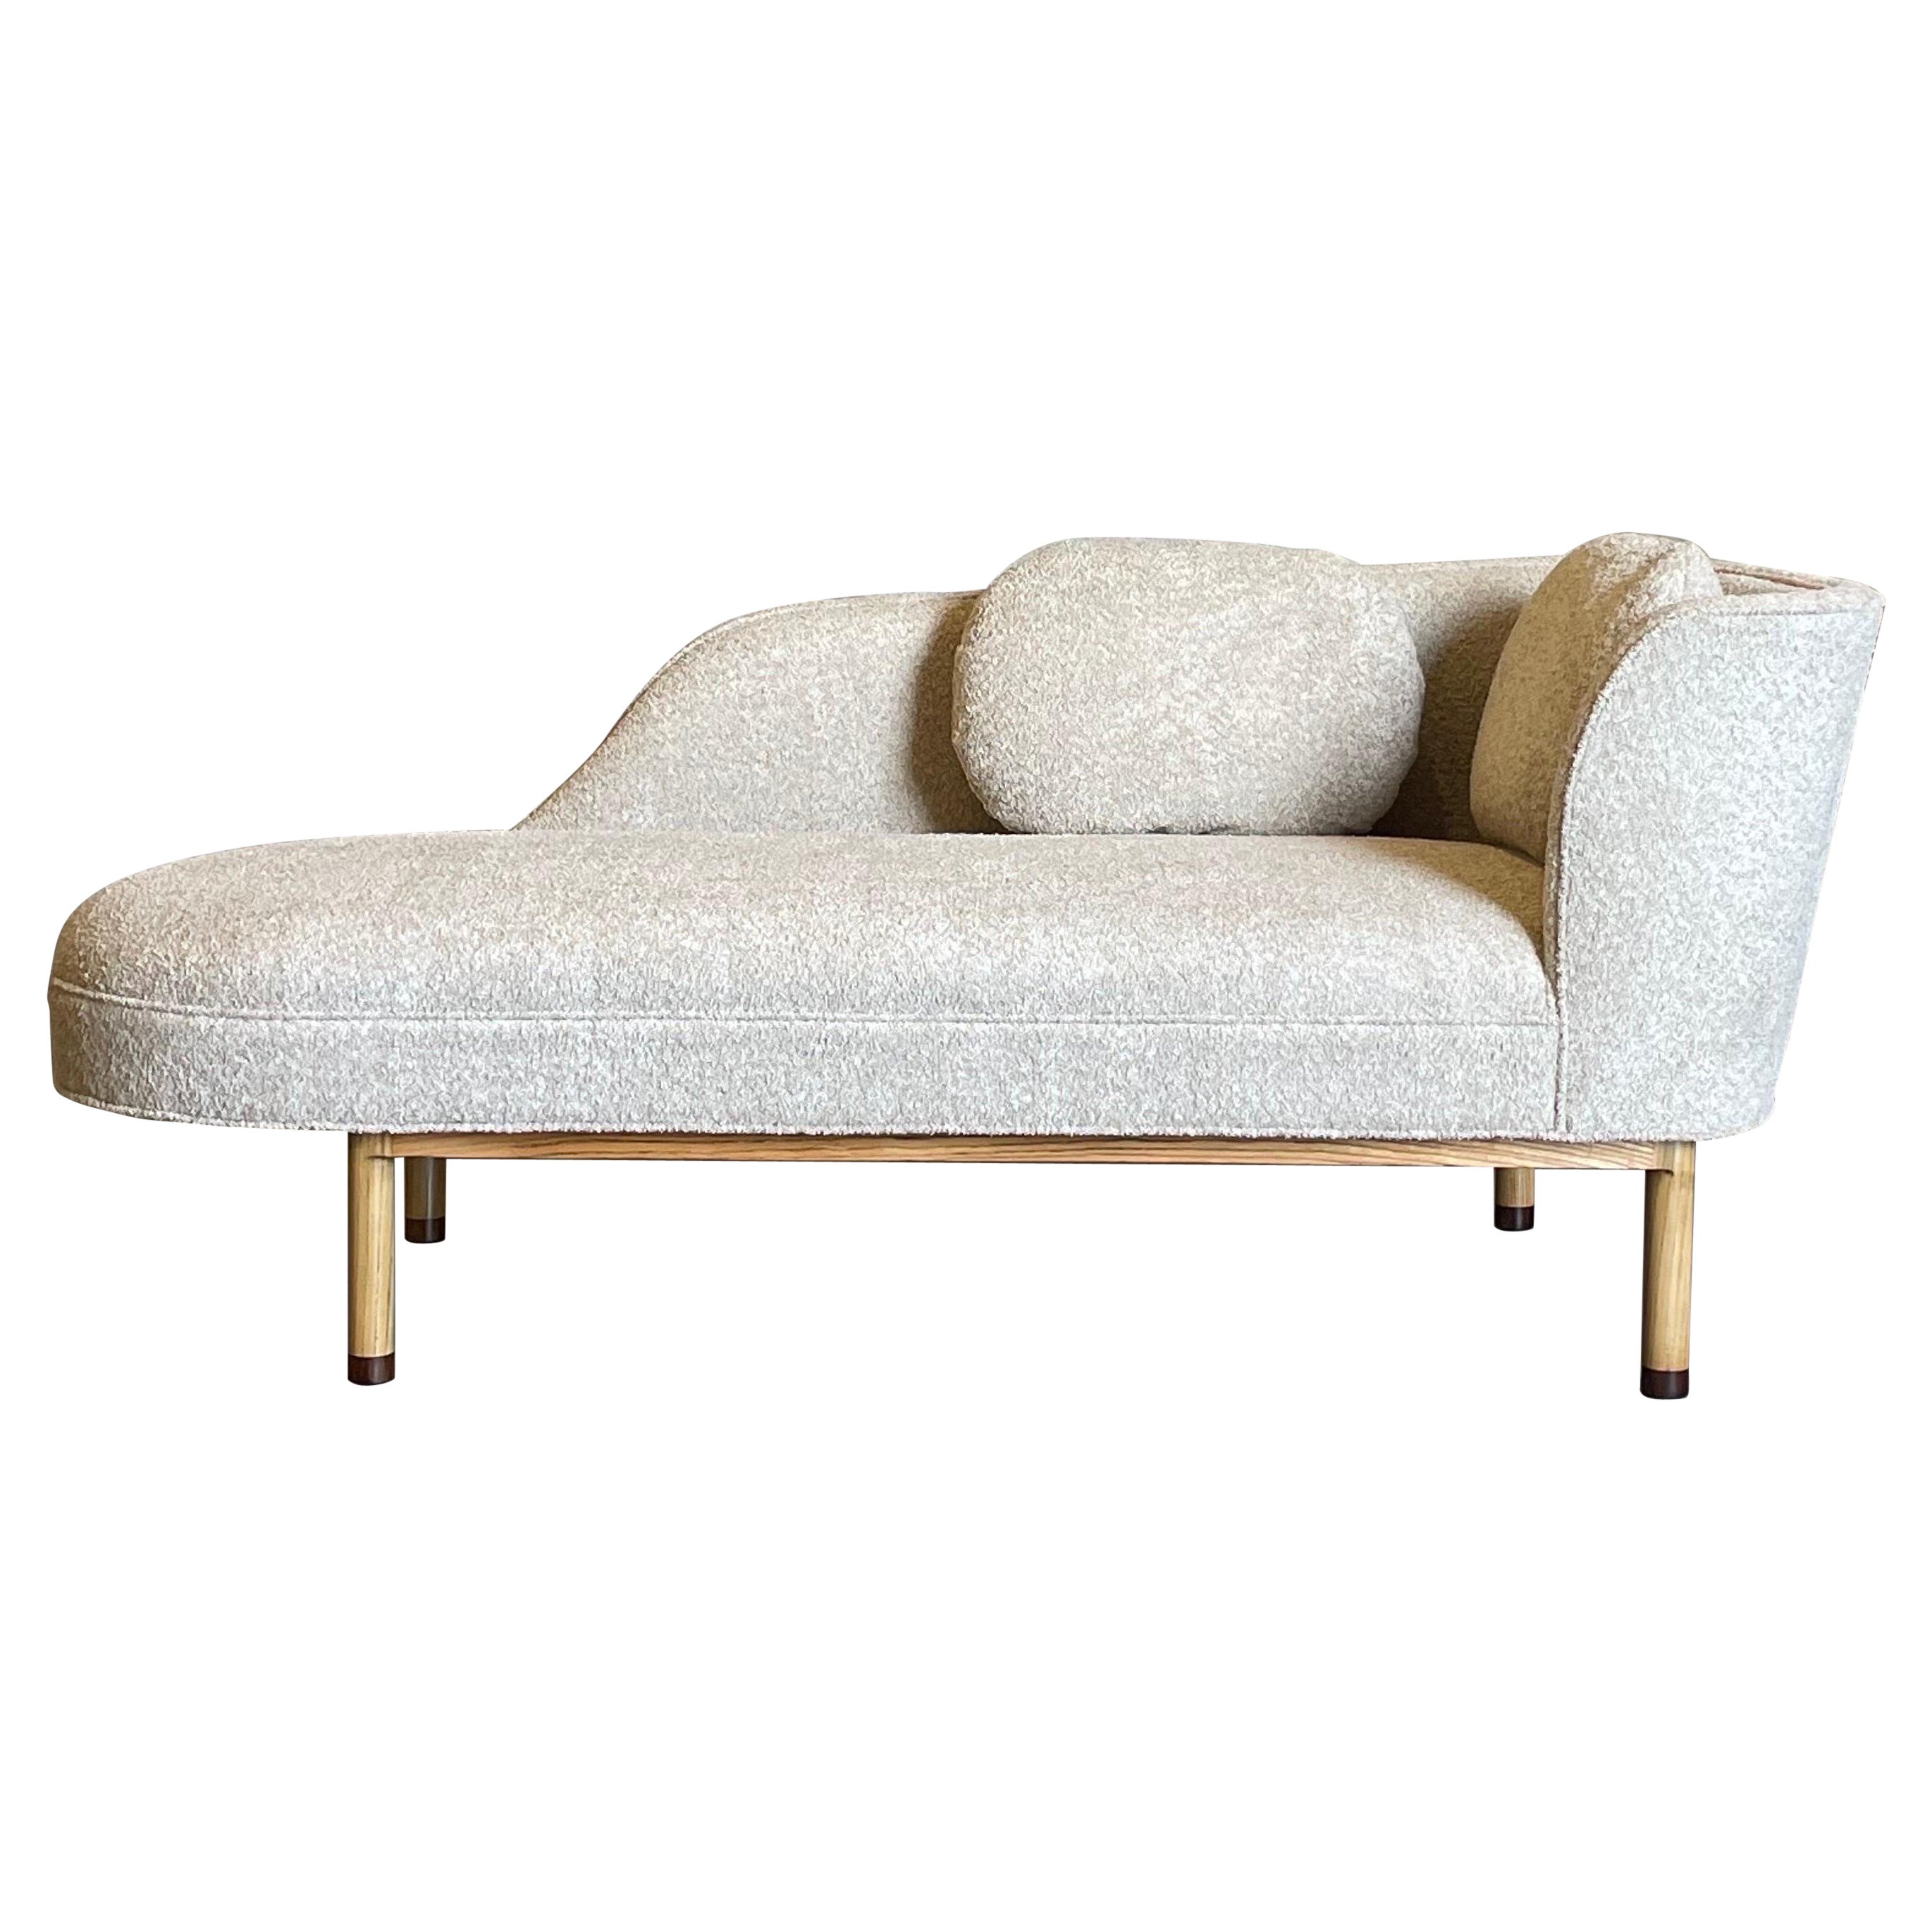 Edward Wormley for Dunbar Rare Chaise Lounge in Bouclé and Ash